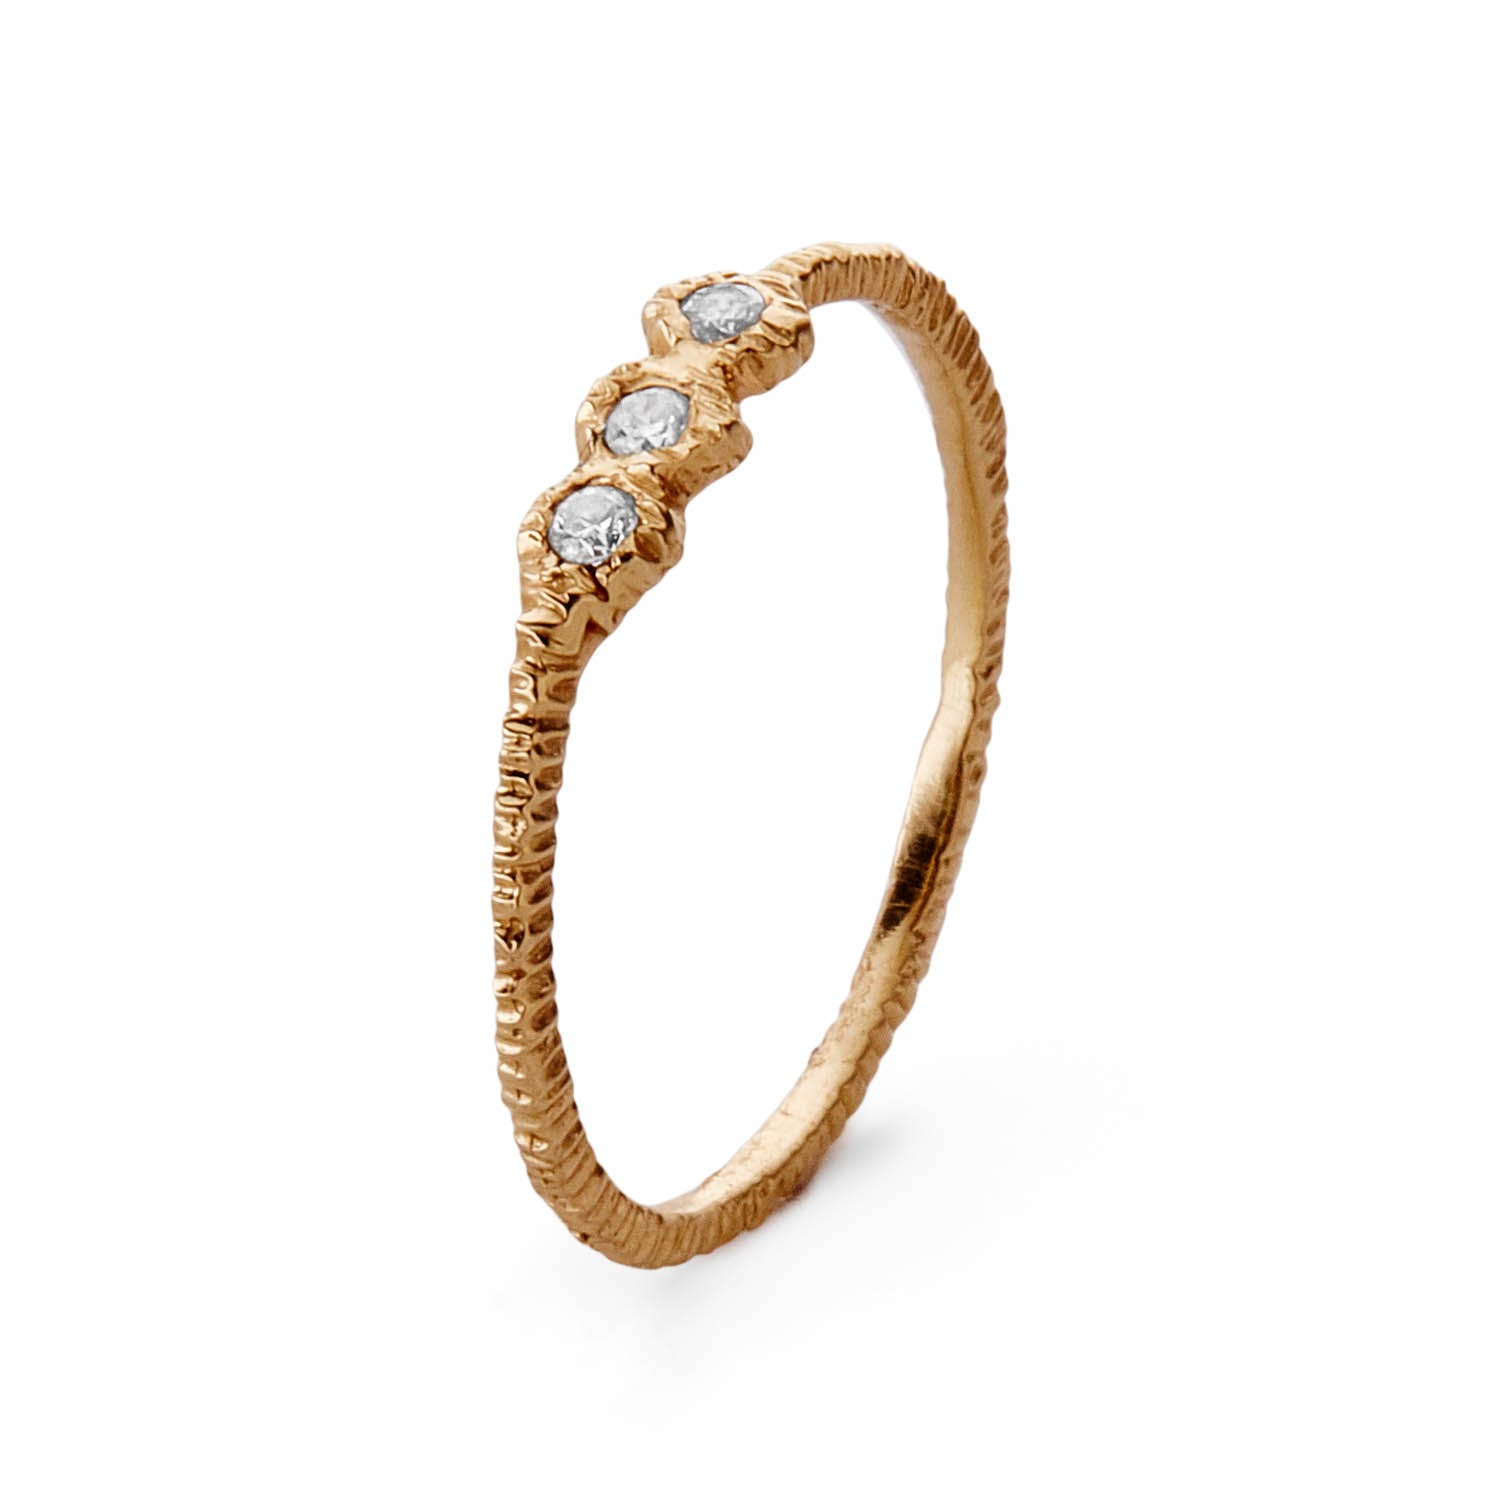 Elegant gold ring with three sparkling gemstones, perfect for special occasions.